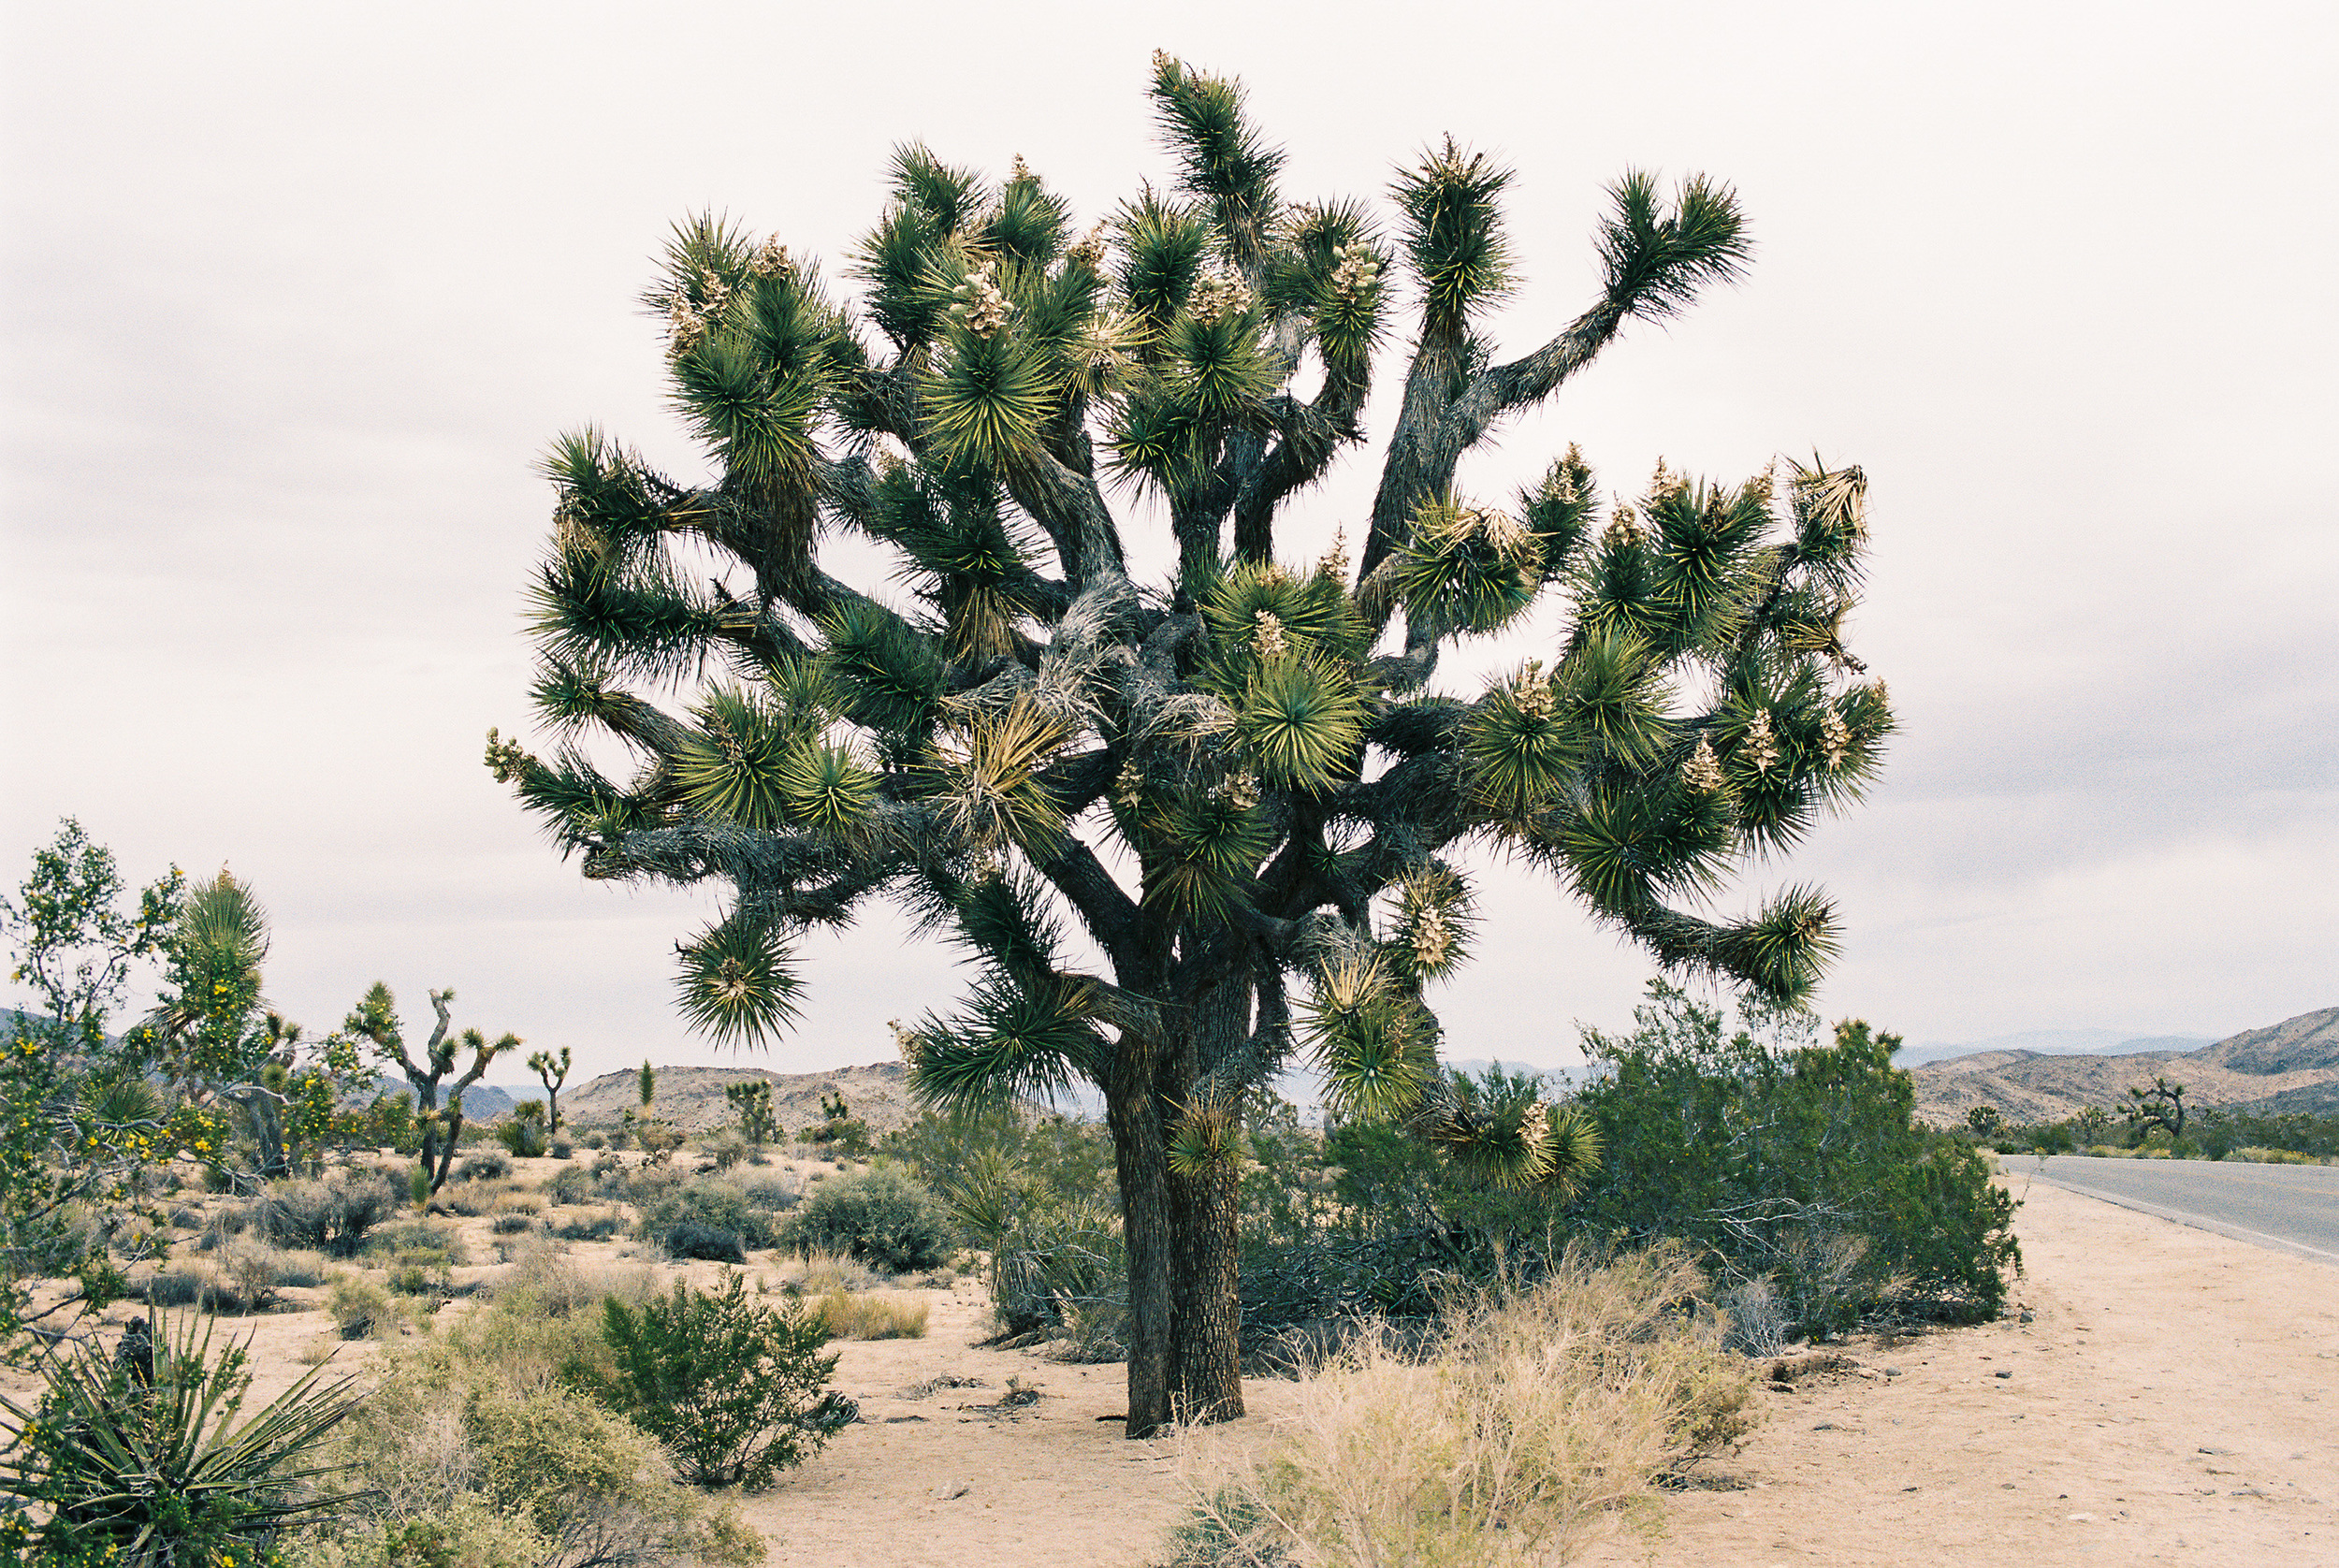 and then there was Joshua Tree. one of the most expansive, glorious places I've ever been.&nbsp;